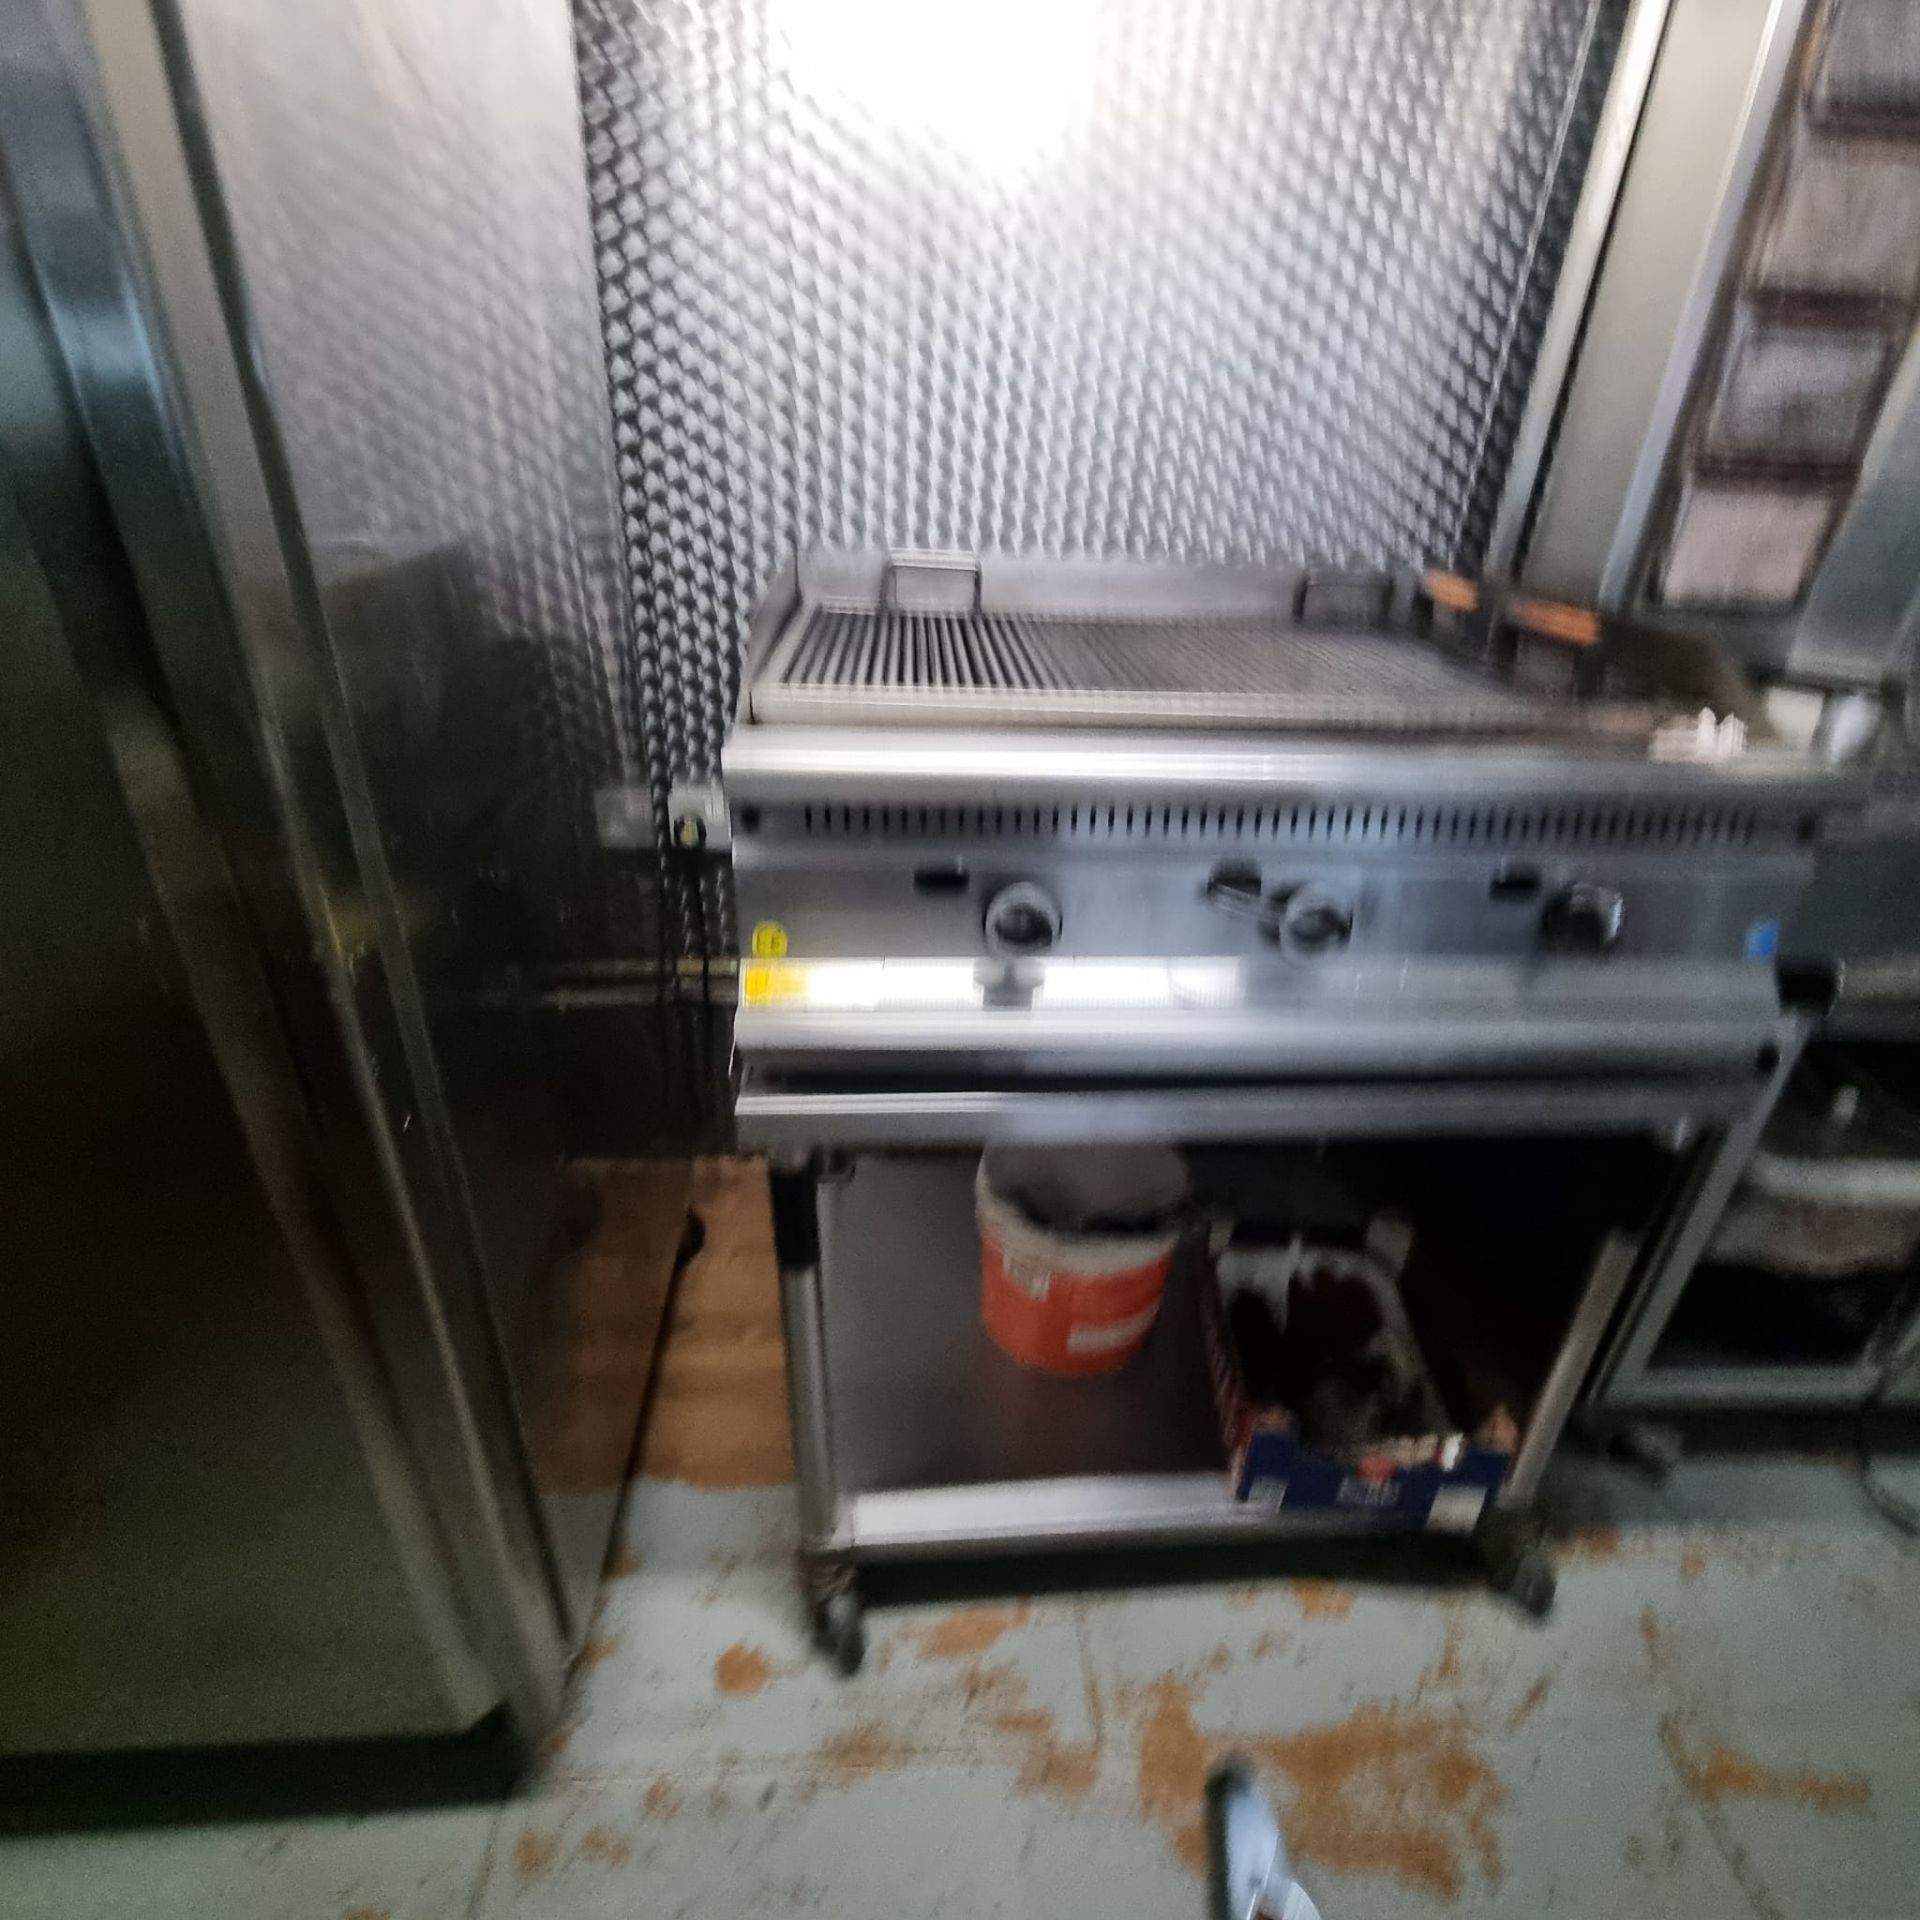 3 BURNER CHARGRILL - NATURAL GAS STILL CONNECTED IN SHOP - 900 MMW  - WATER TRAY UNDER - Image 3 of 3